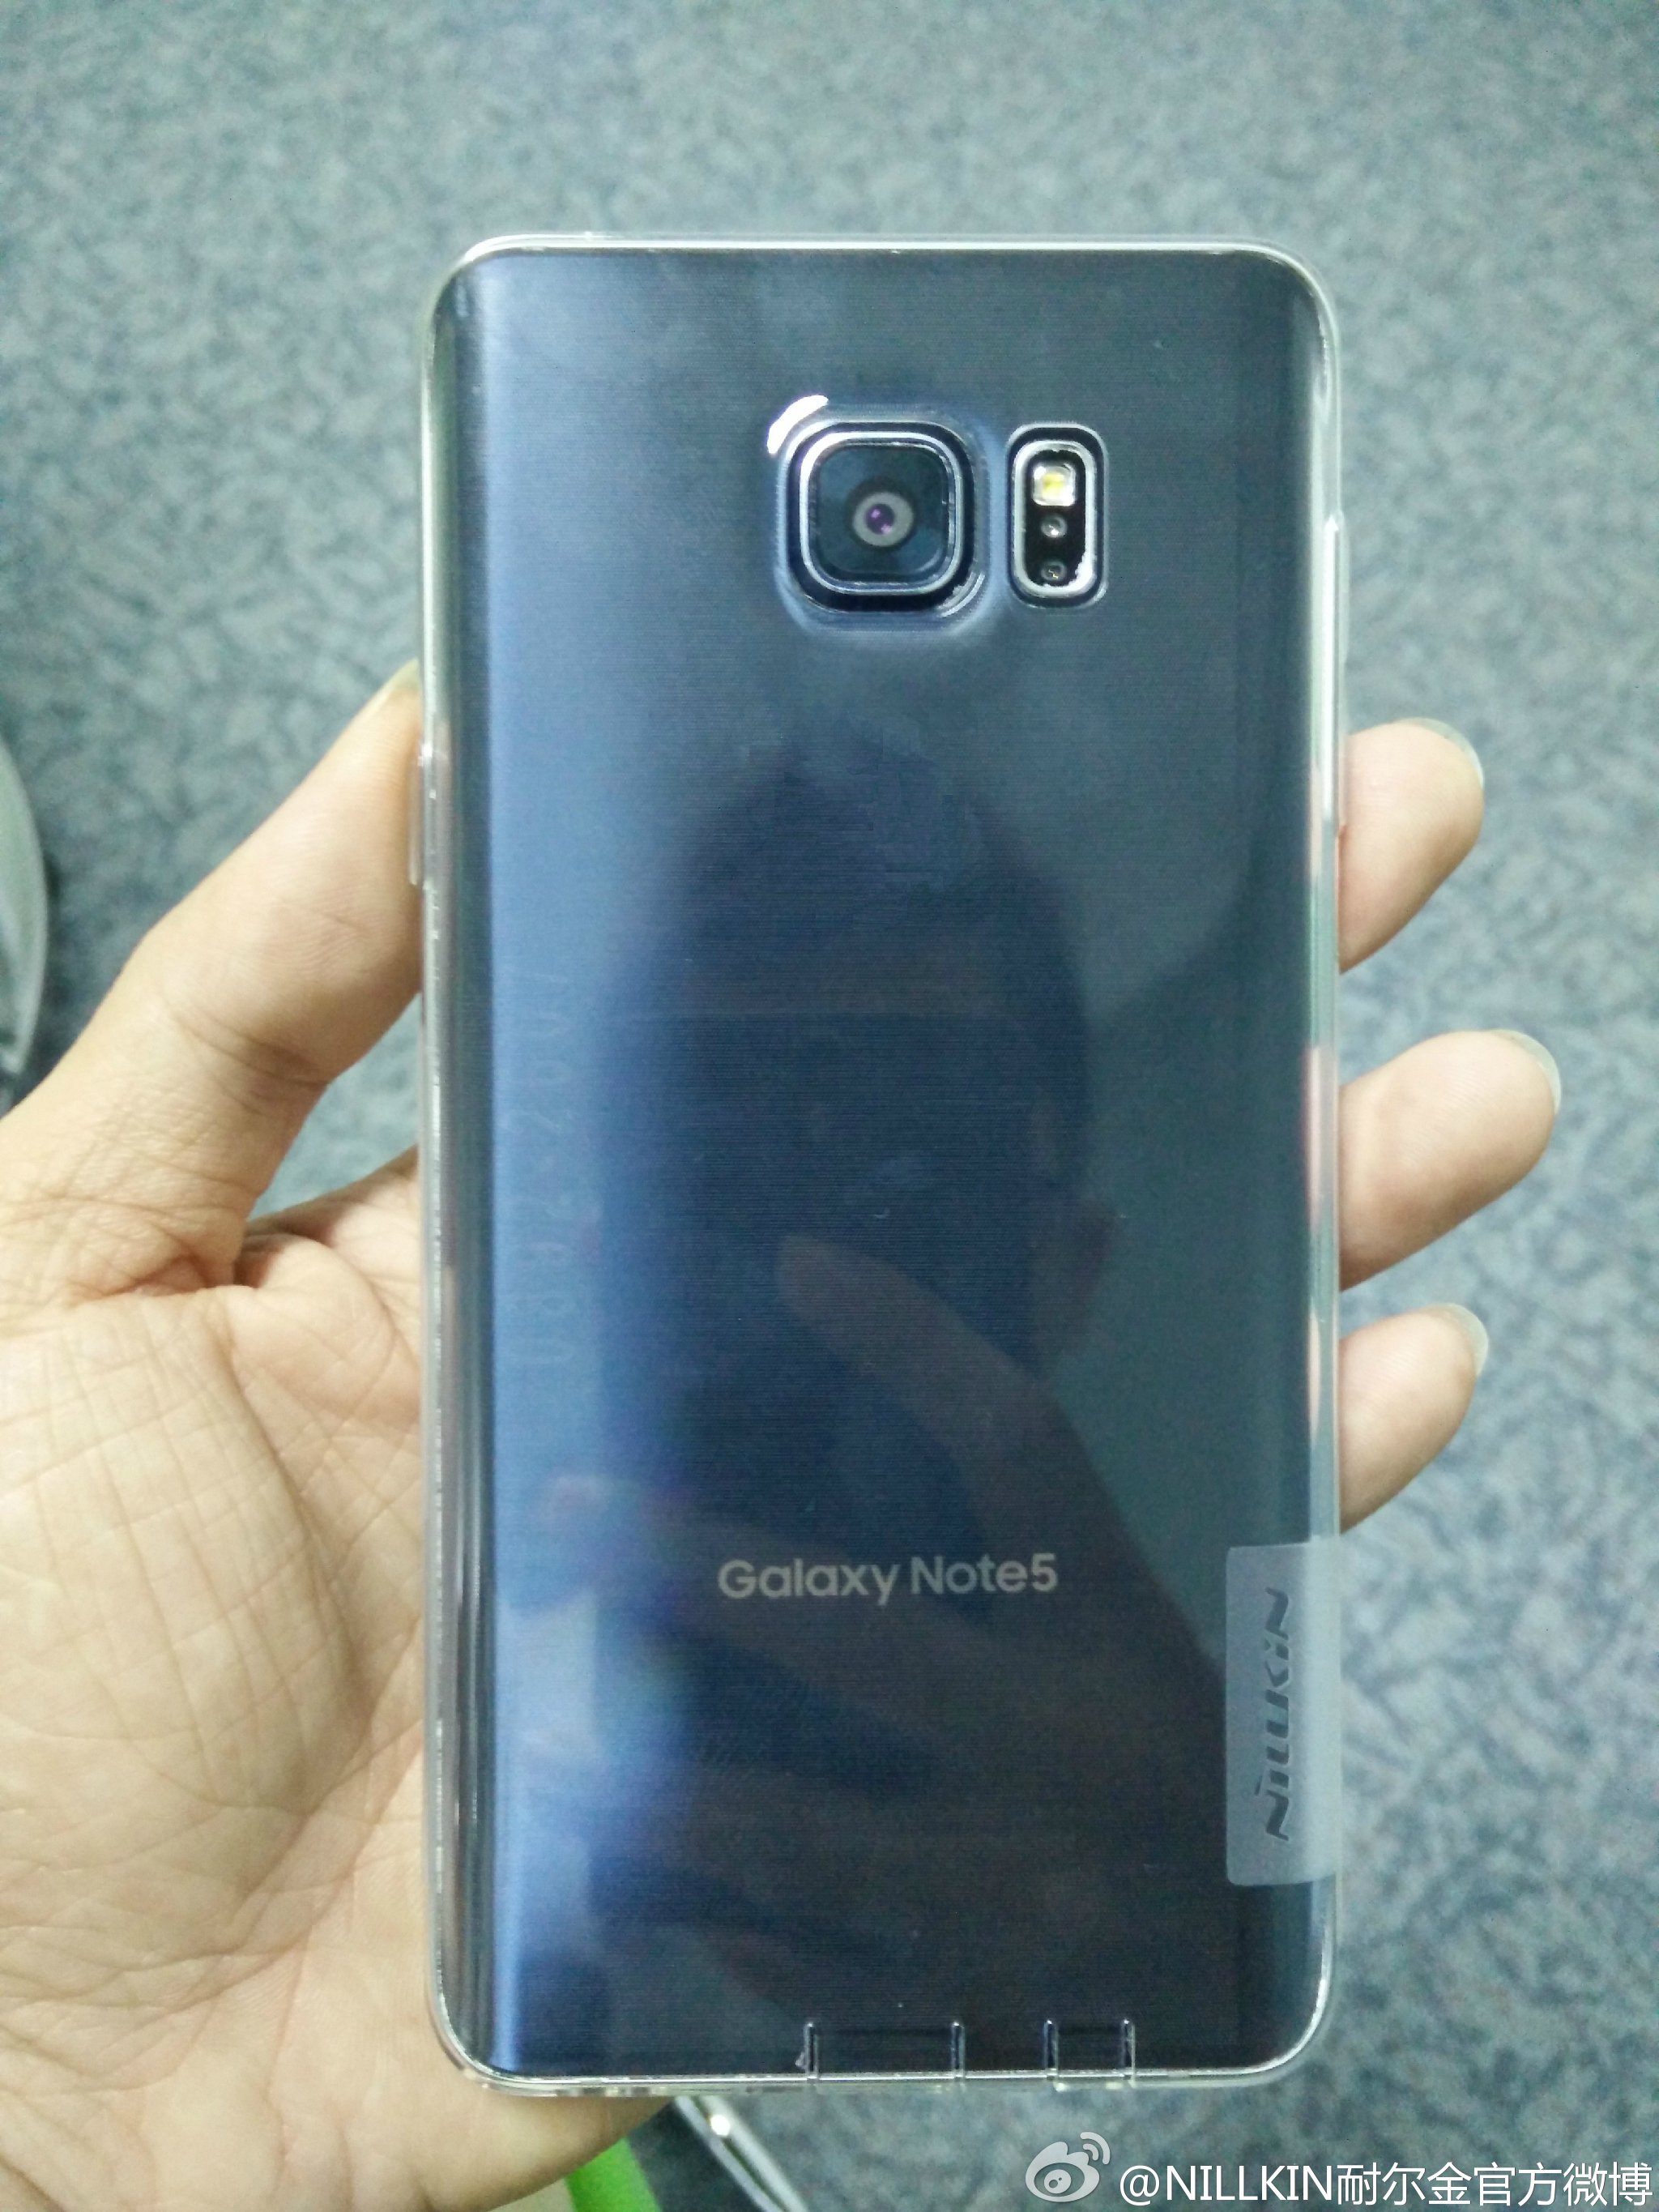 Samsung-Galaxy-Note-5-leaked-images-2